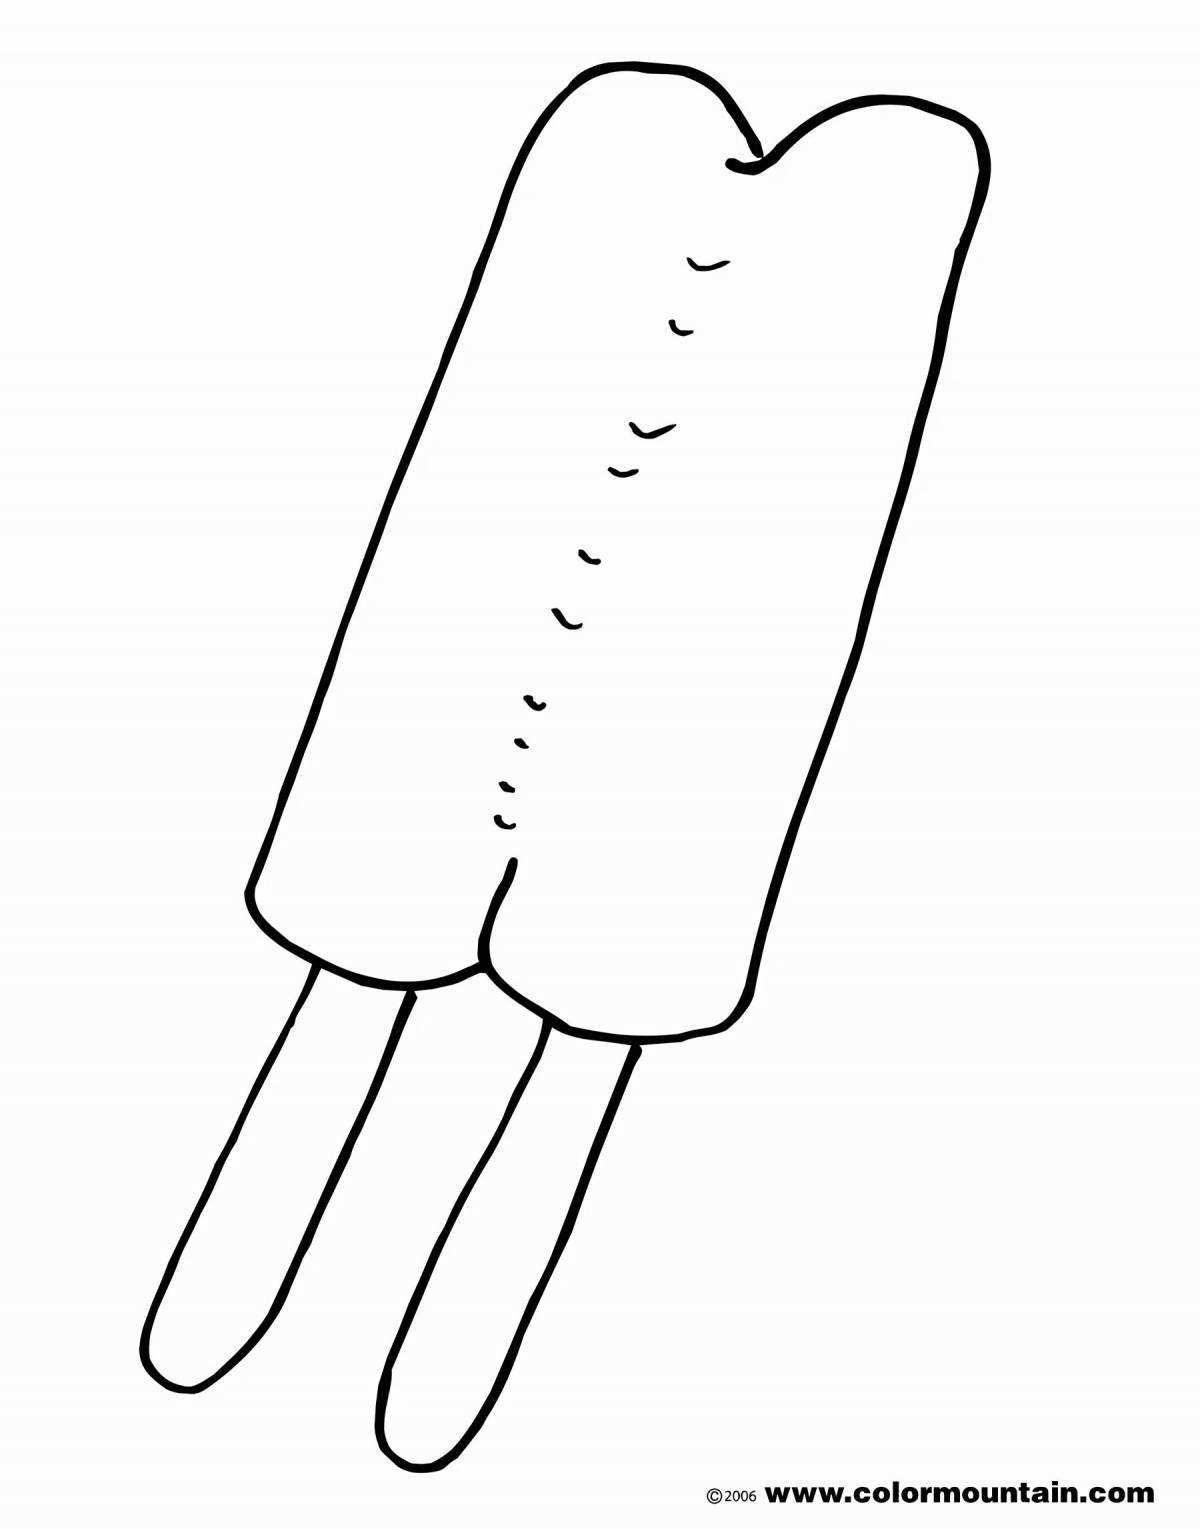 Festive popsicle coloring book